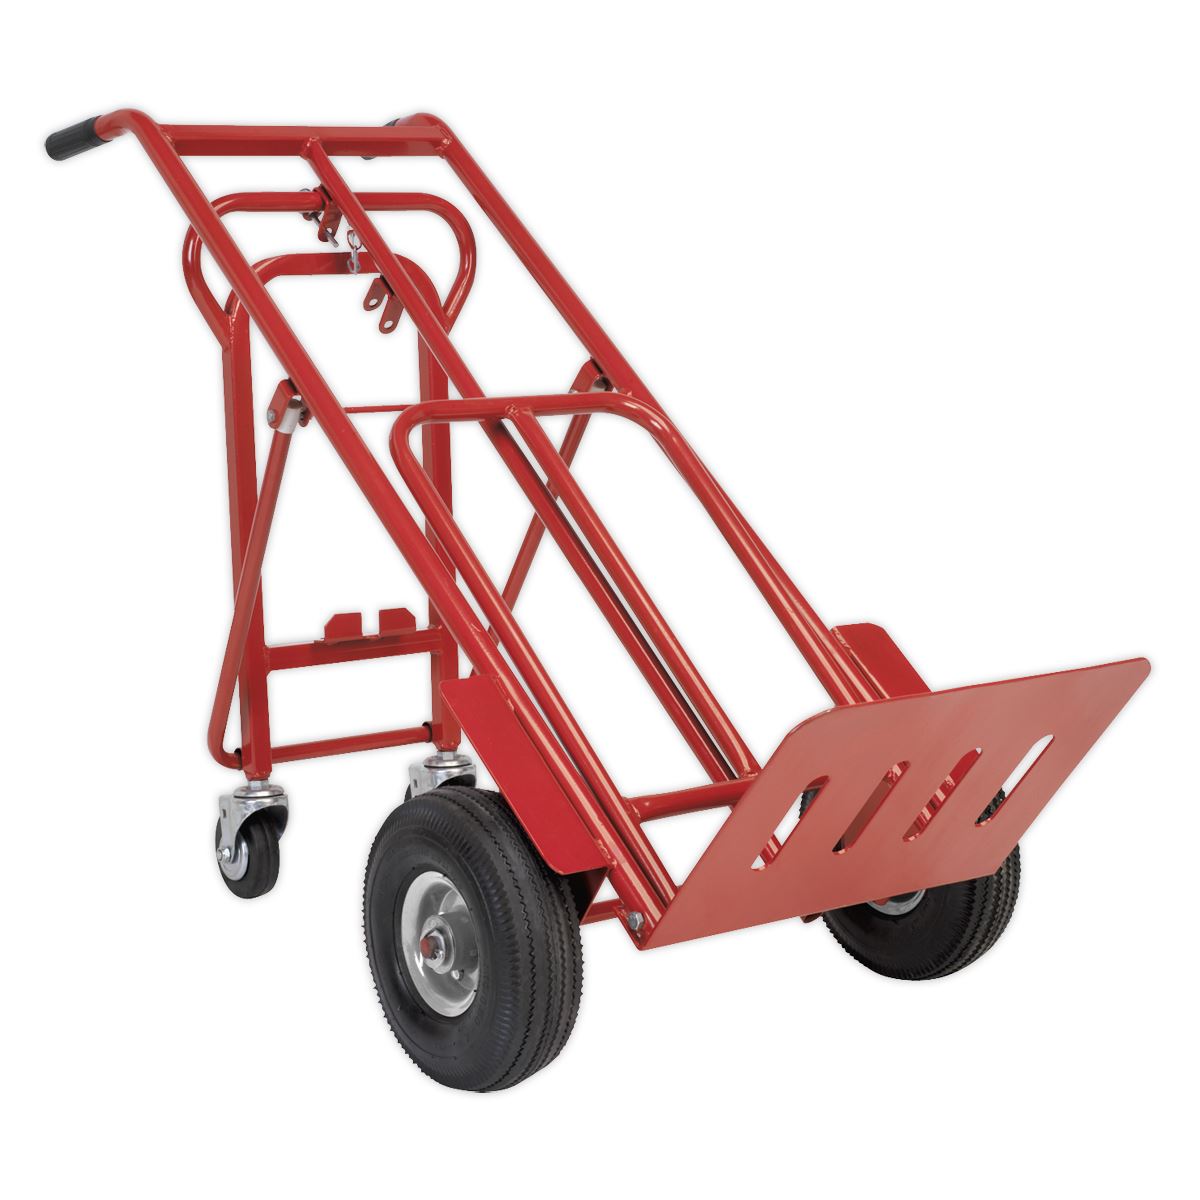 Sealey Sack Truck 3-in-1 with Pneumatic Tyres 250kg Capacity